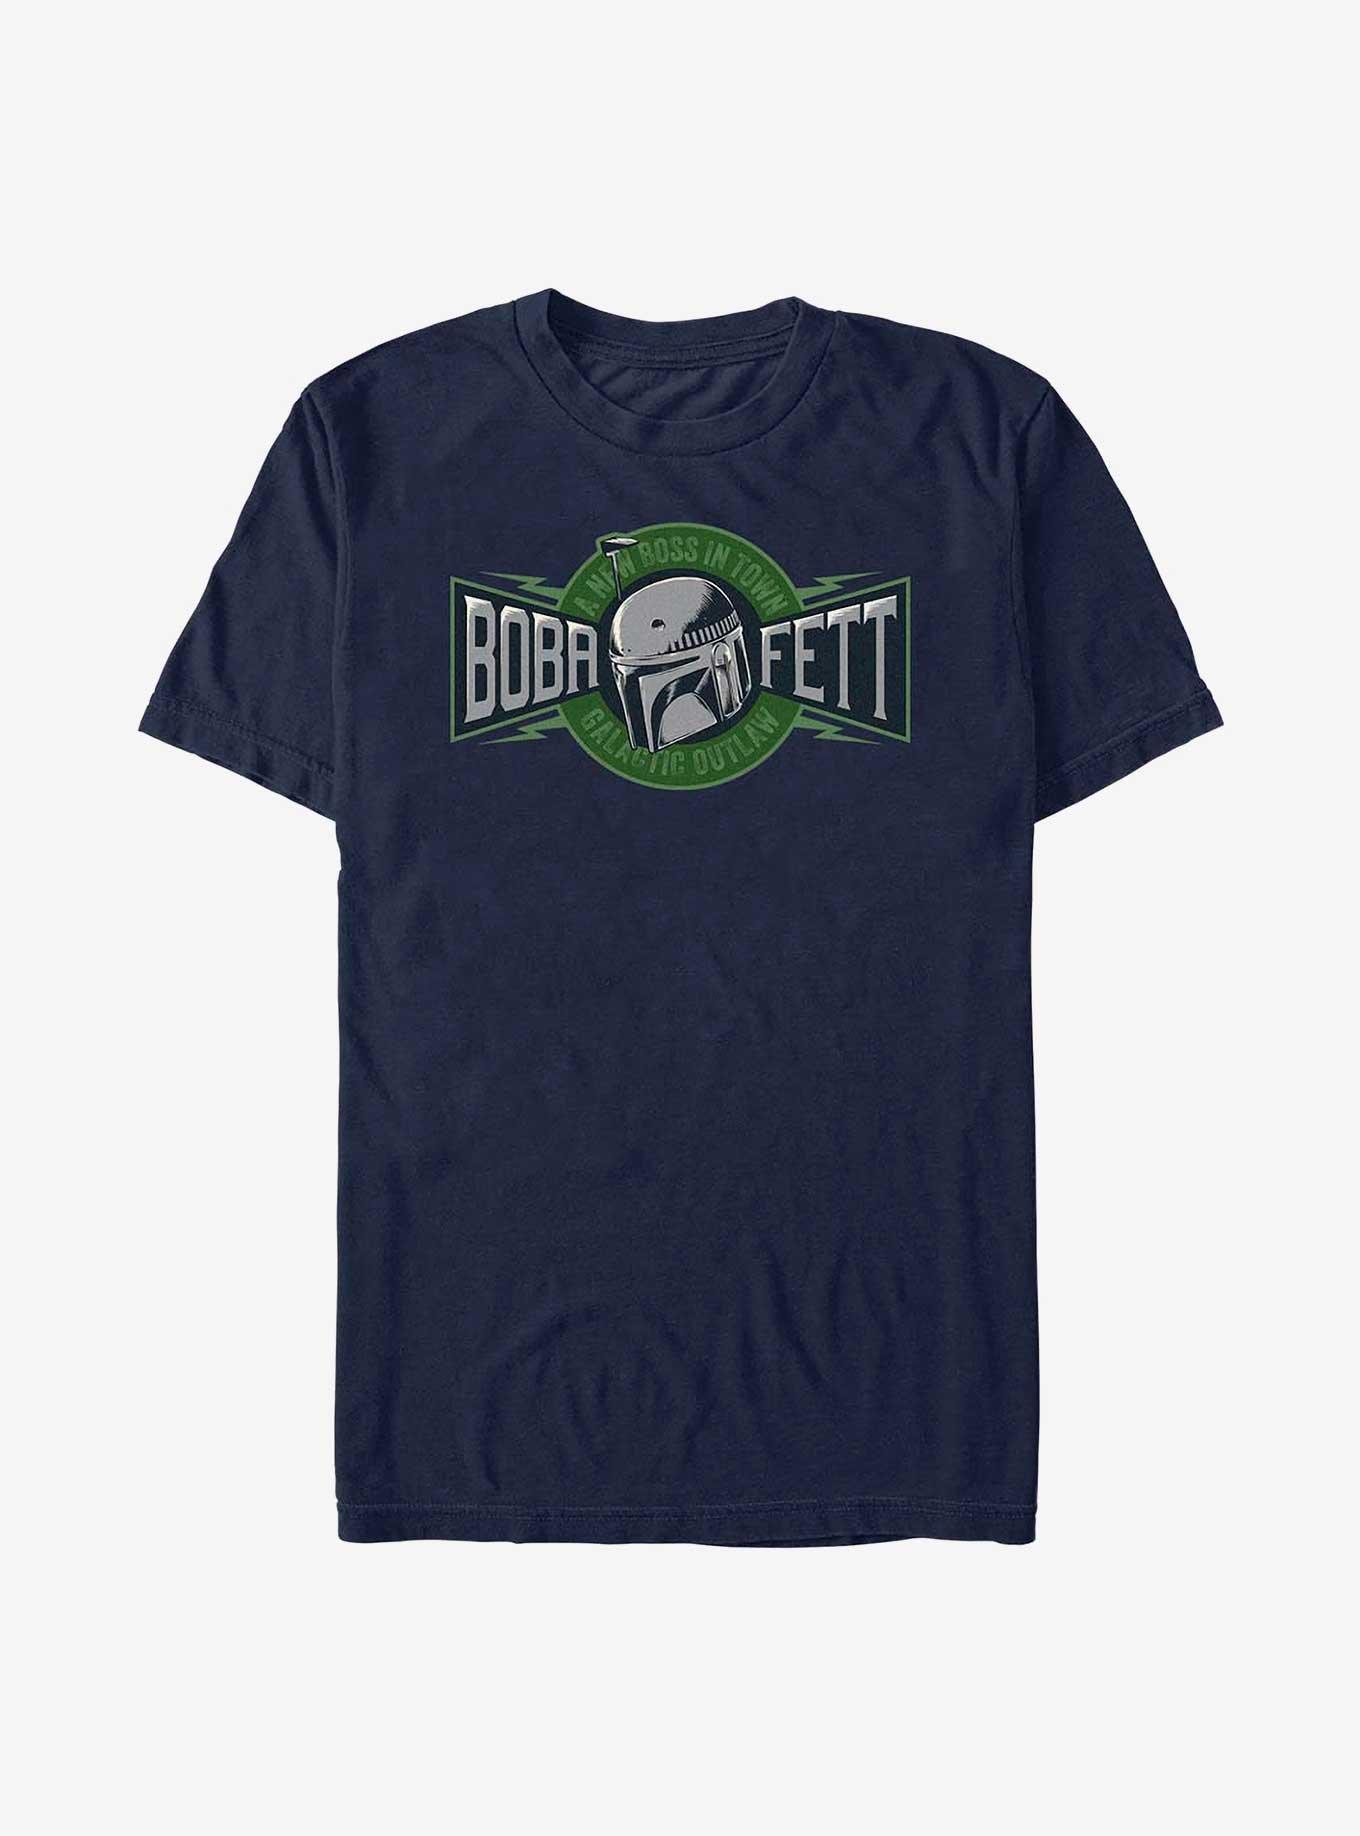 Star Wars: The Book Of Boba Fett New Boss In Town T-Shirt, NAVY, hi-res